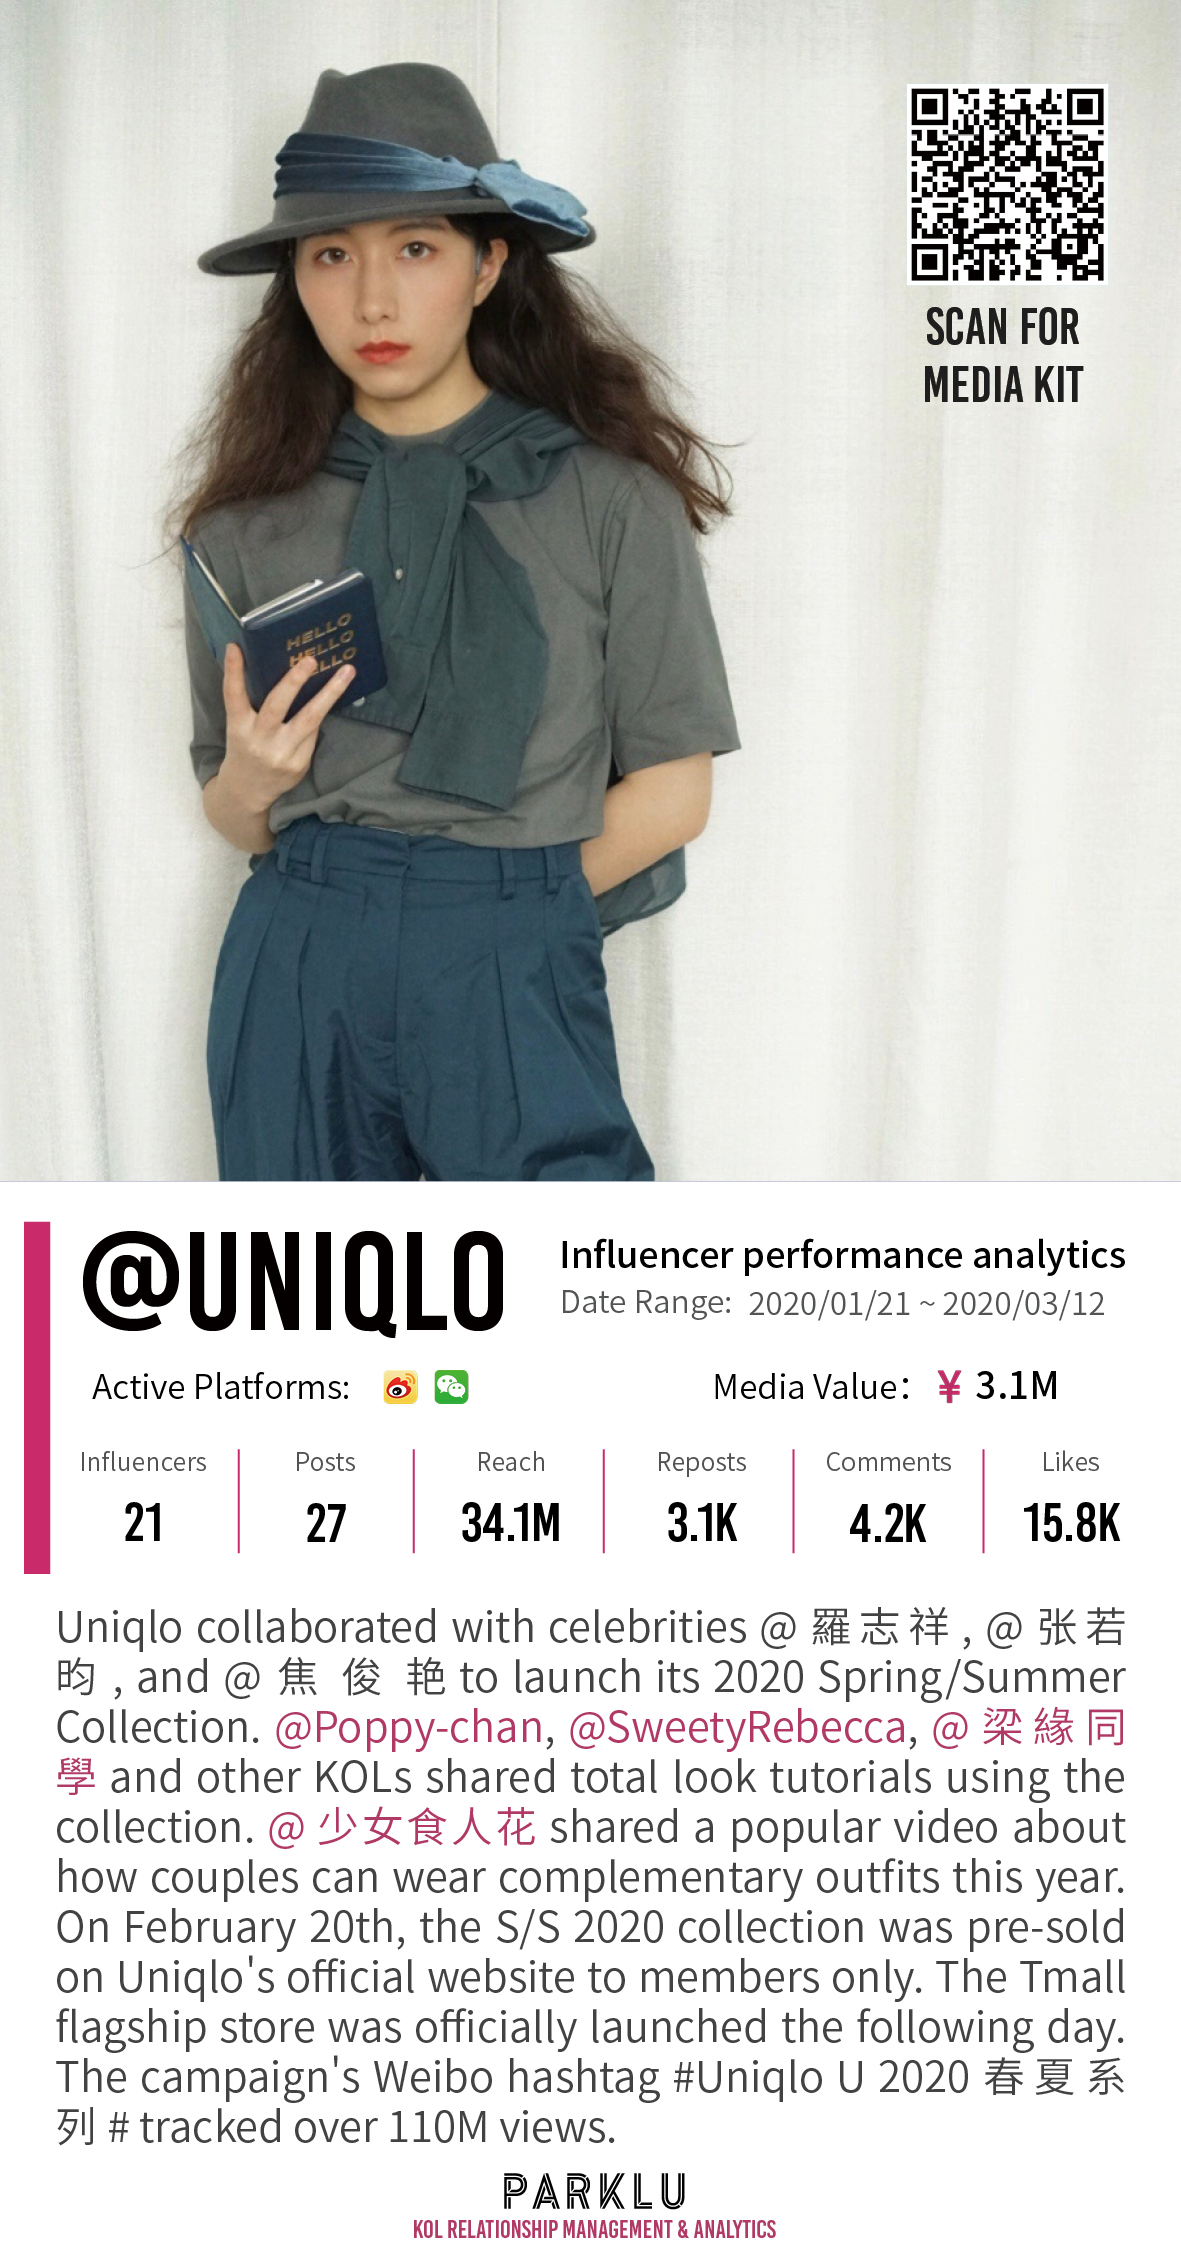 Uniqlo 2020 Spring/Summer Collection